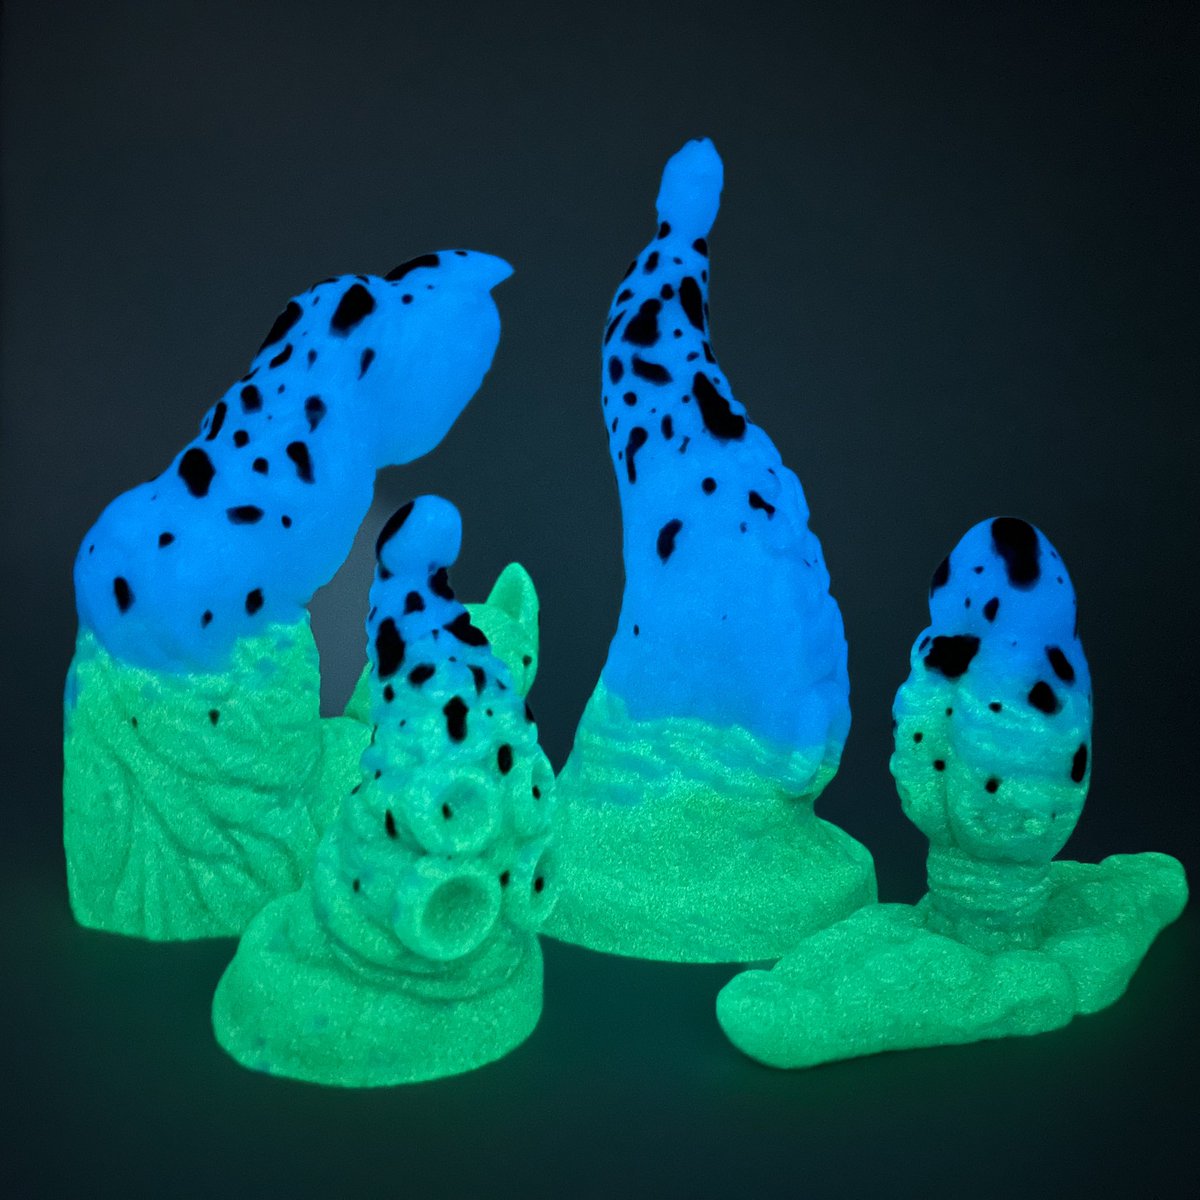 Some more froggy pours for this Friday’s drop at 6pm BST. This time, poison dart frogs. And they glow too! 🤩